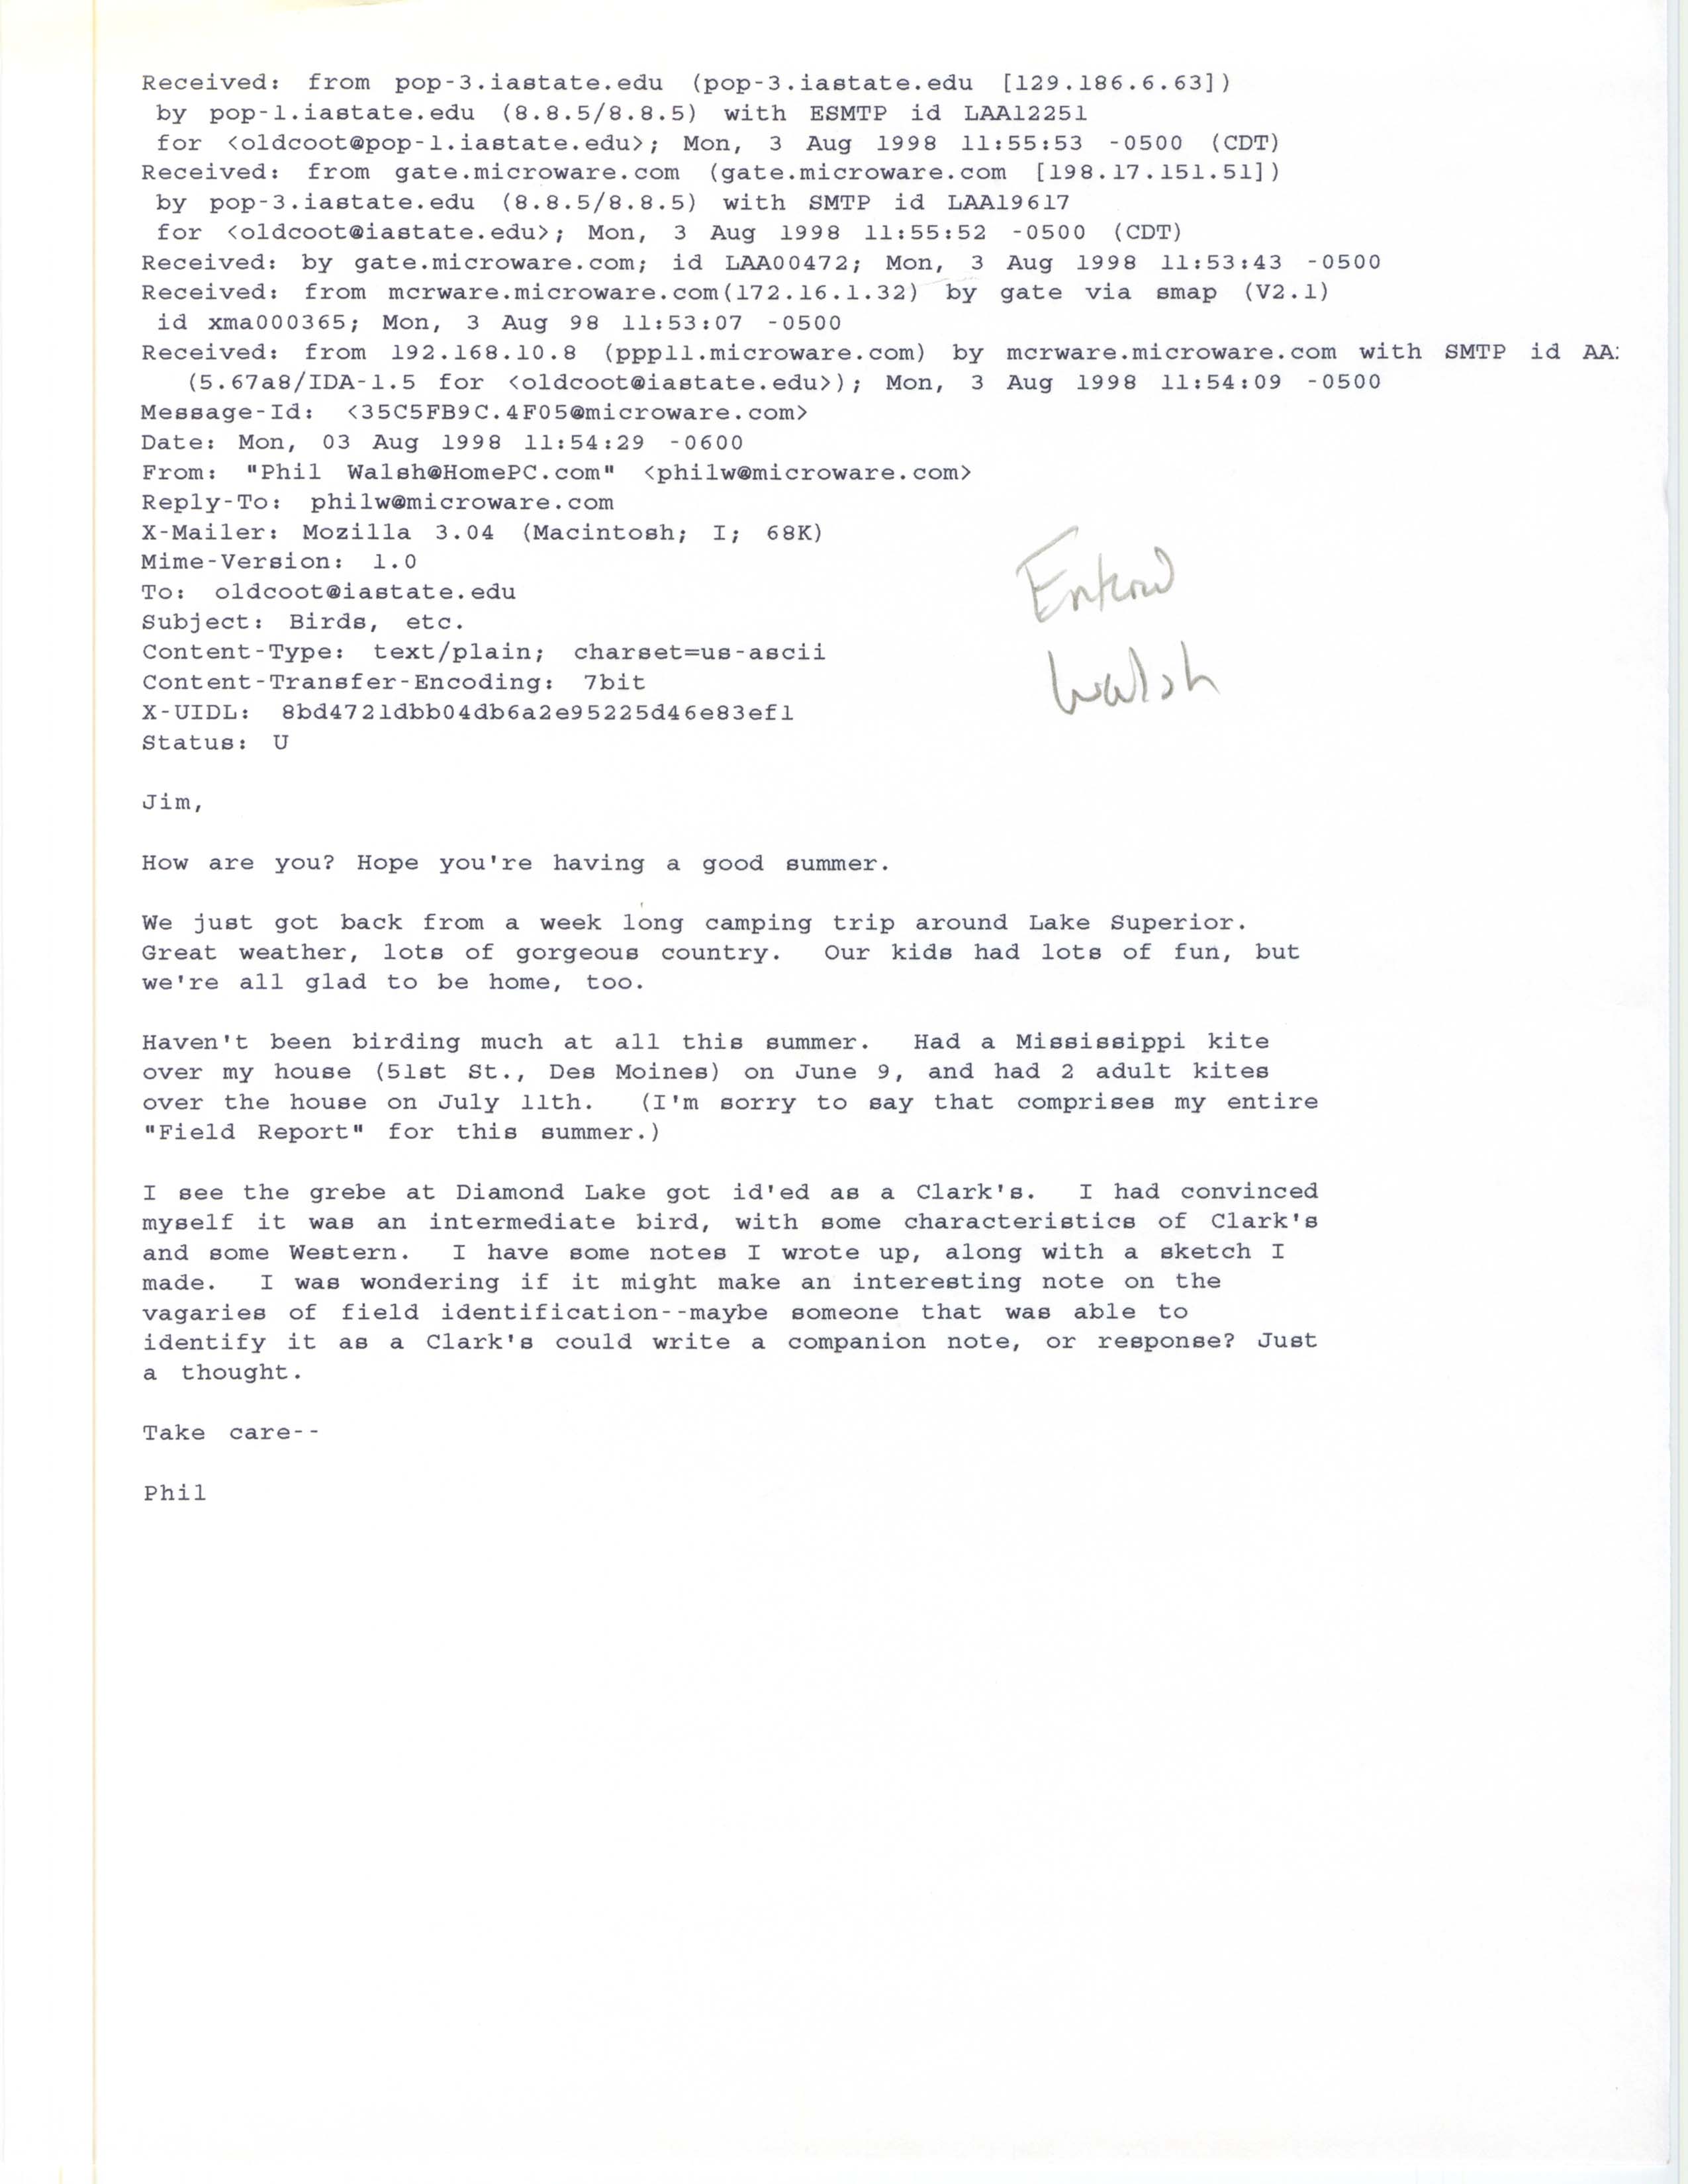 Phil Walsh email to Jim Dinsmore regarding Mississippi Kite sightings, August 3, 1998